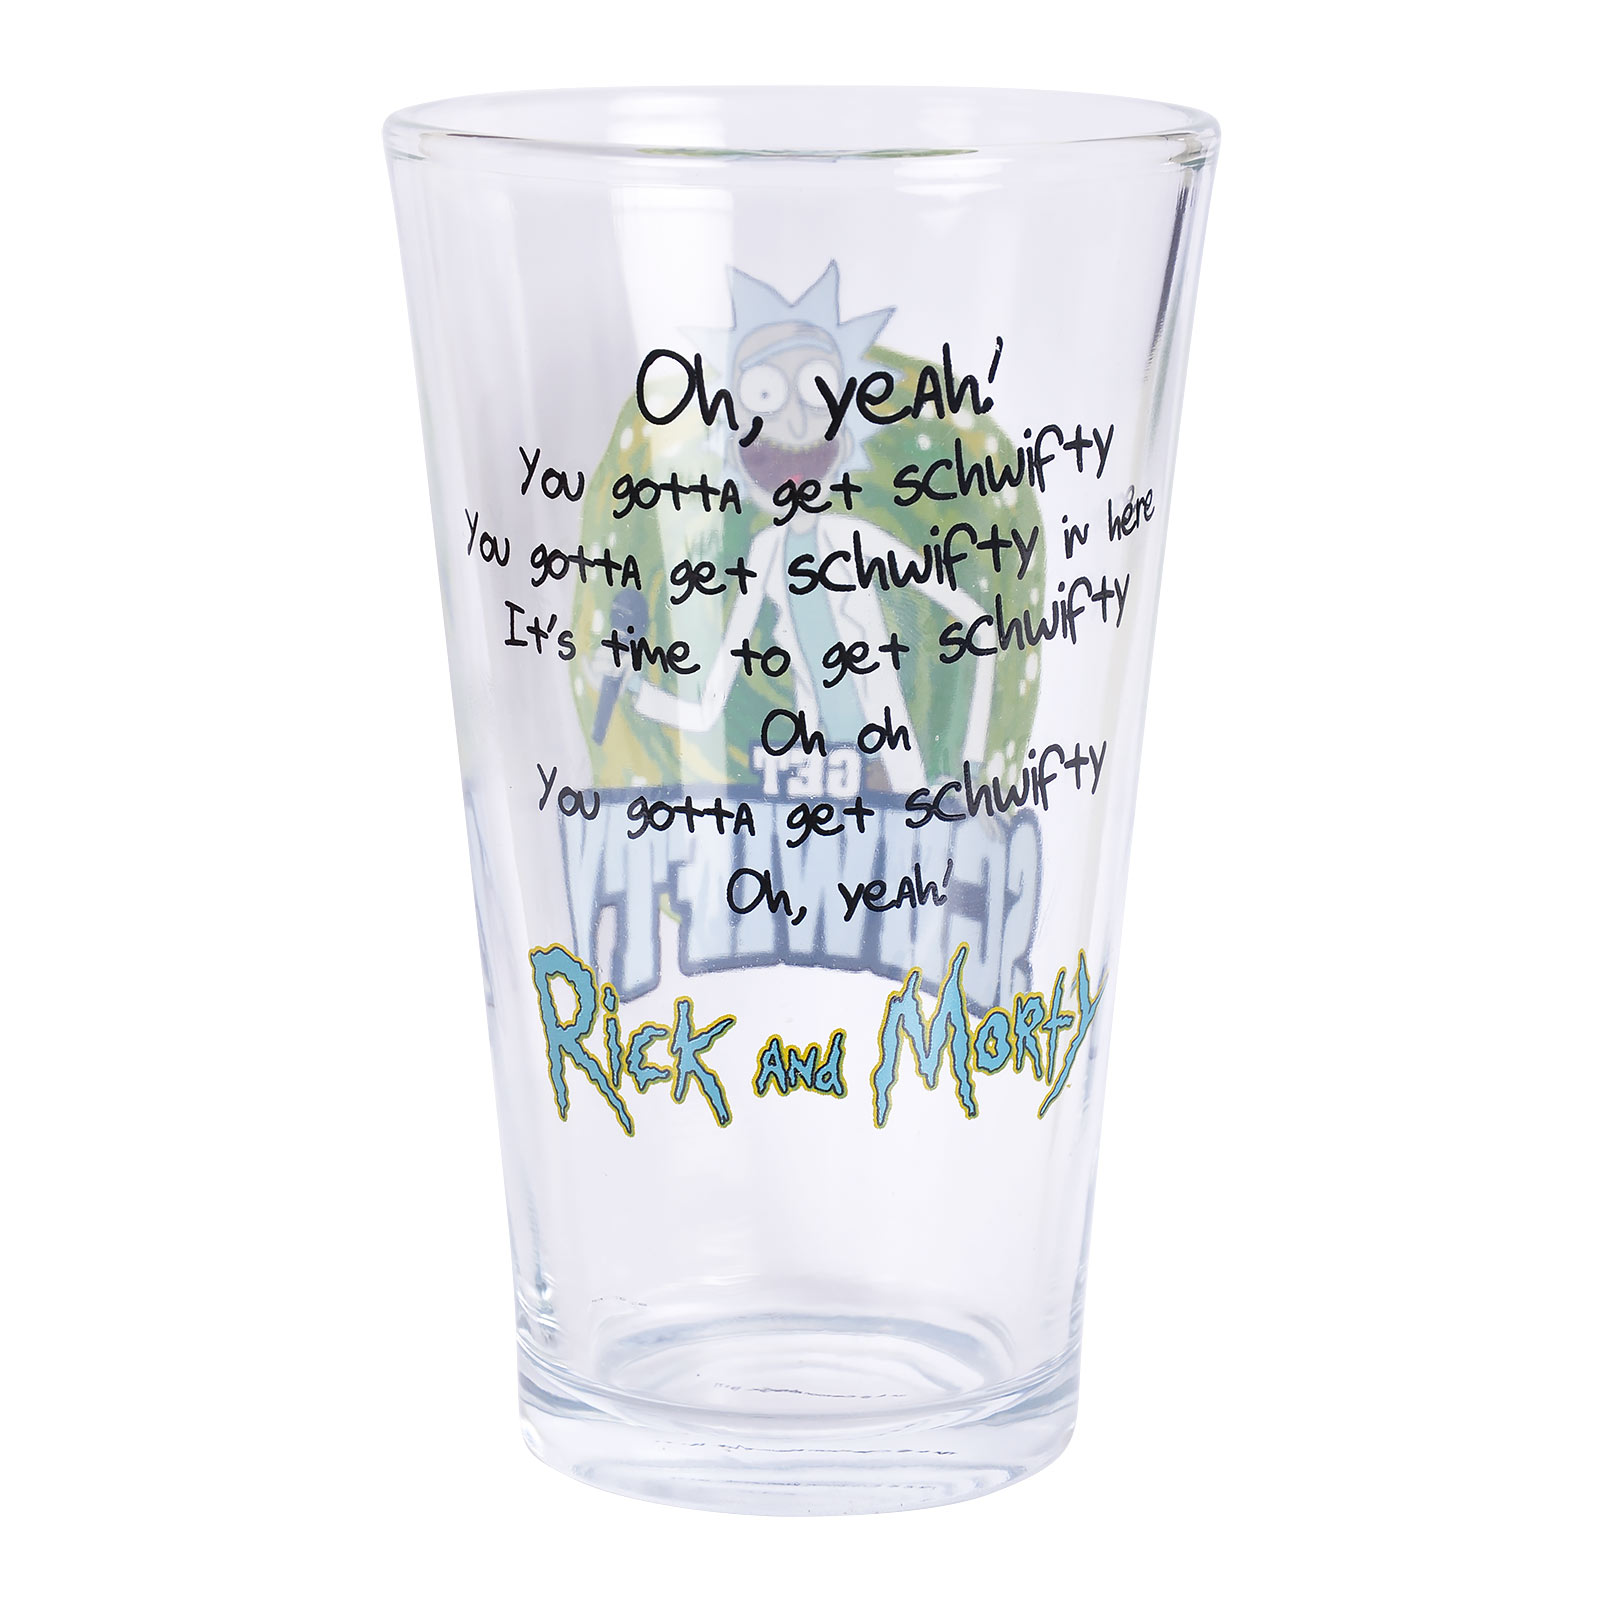 Rick and Morty - Get Schwifty Glass